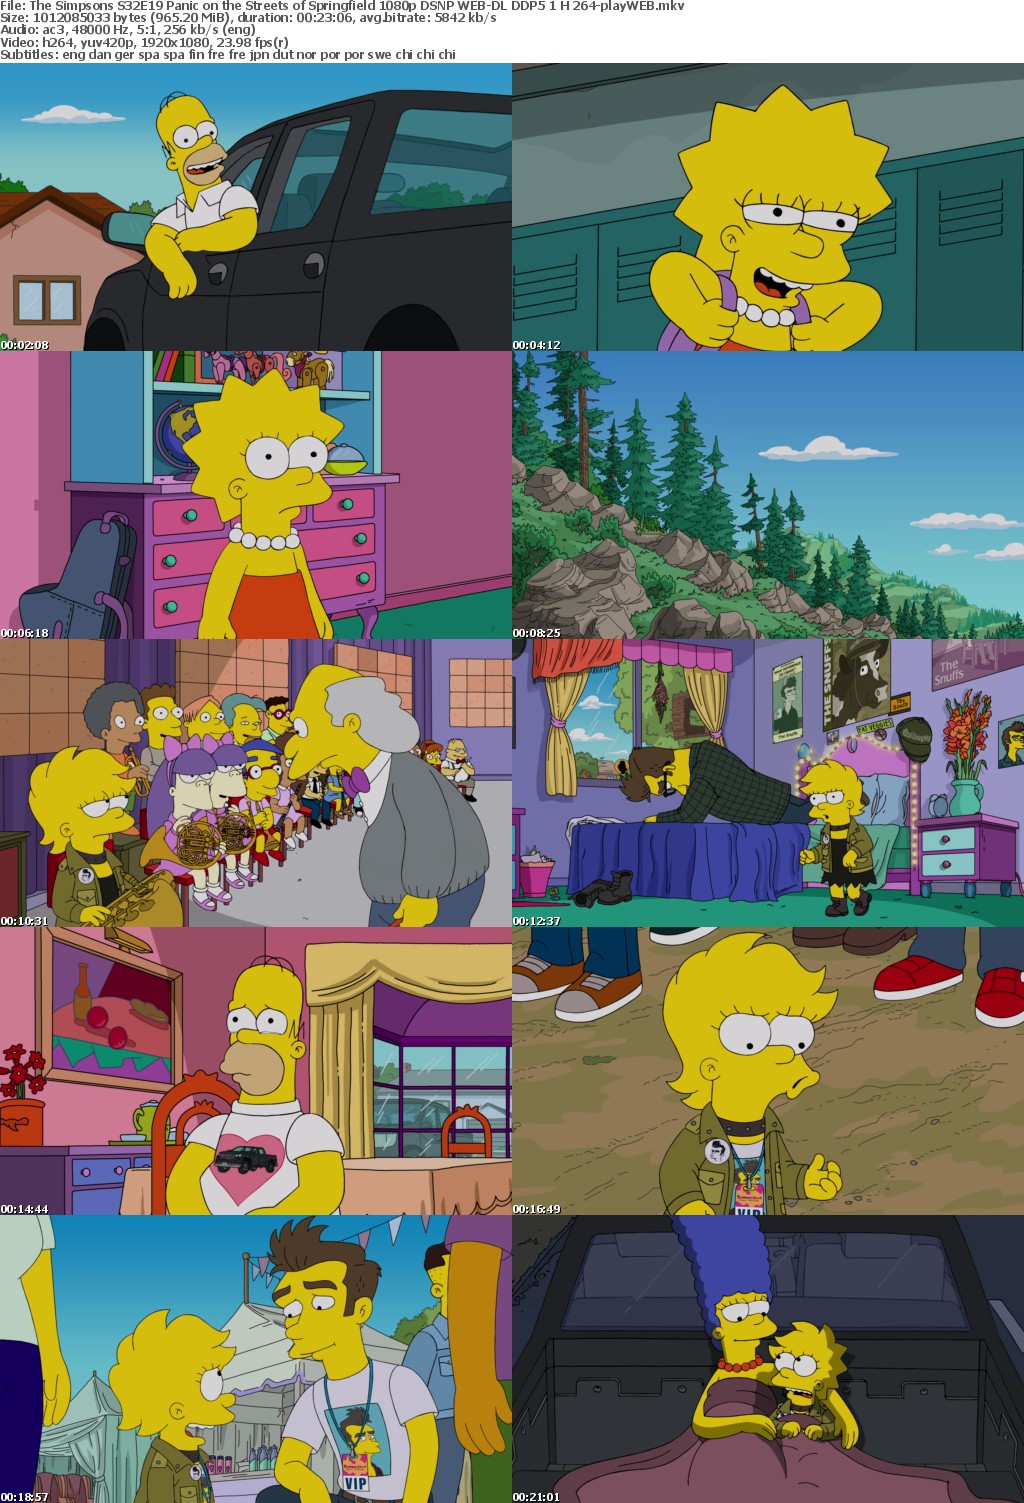 The Simpsons S32E19 Panic on the Streets of Springfield 1080p DSNP WEB-DL DDP5 1 H 264-playWEB